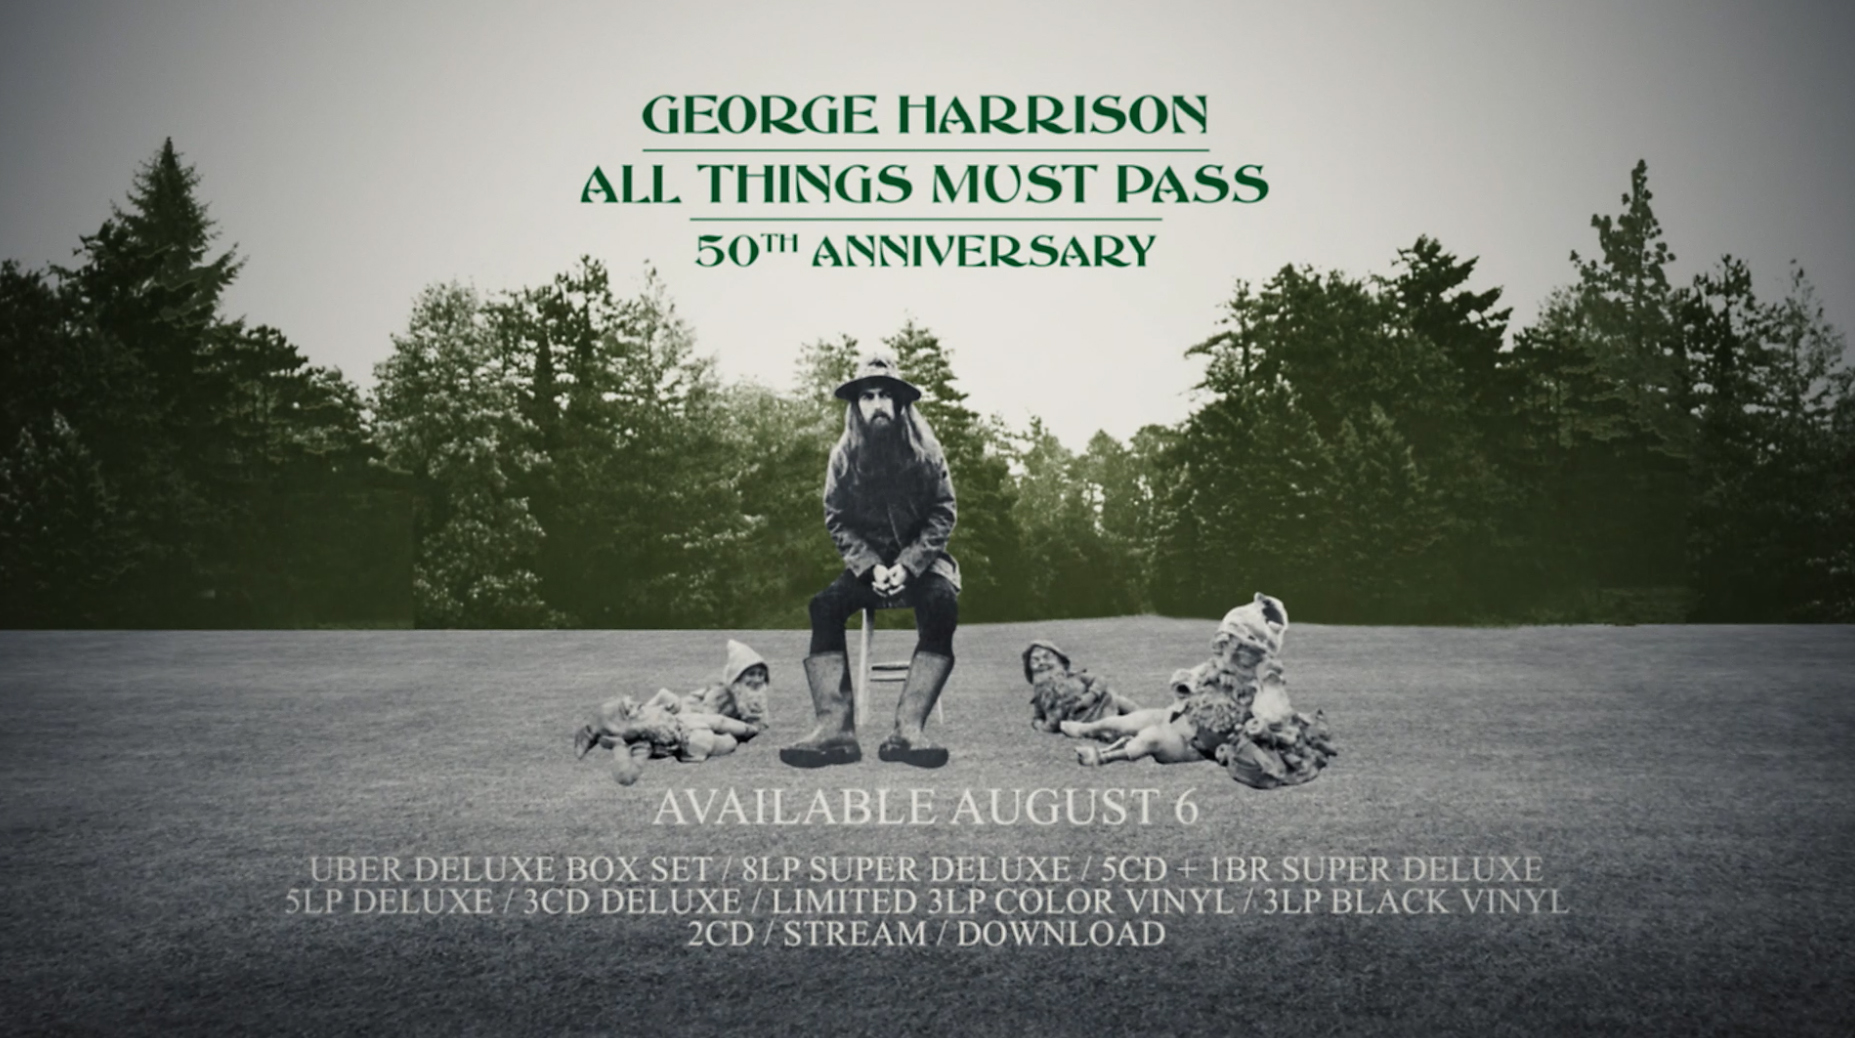 All Things Must Pass 50th Anniversary